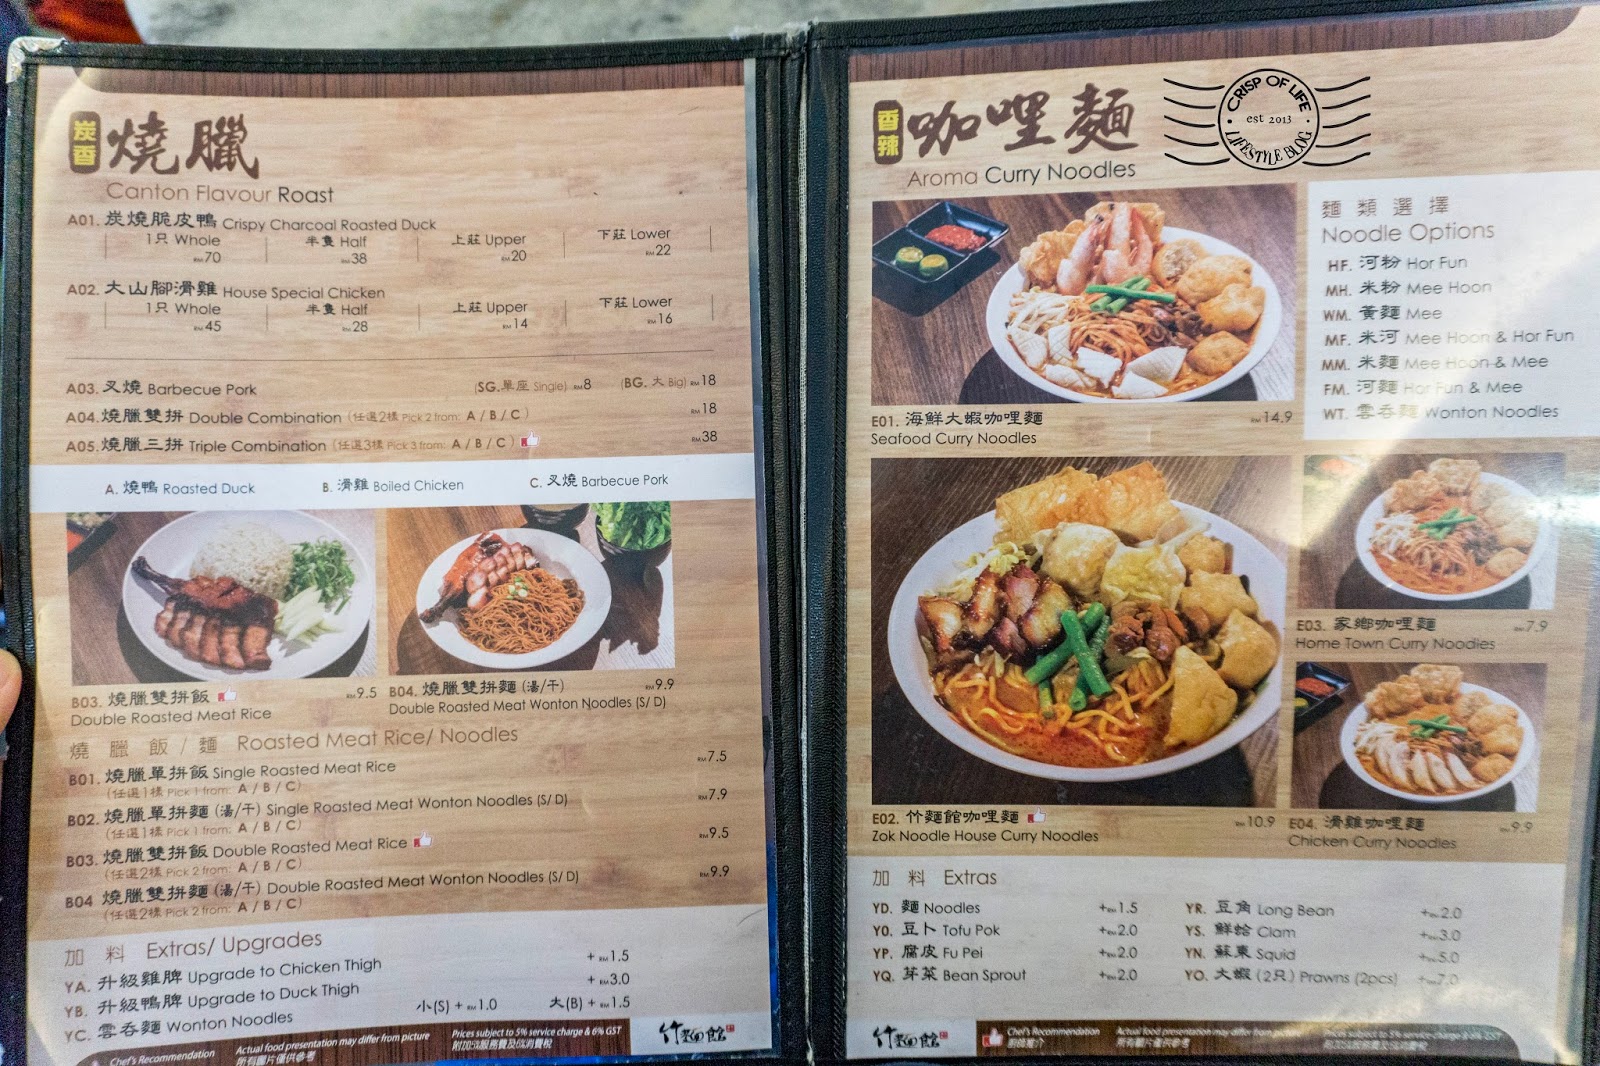 Dim sum and noodle eatery in Setia Alam, Selangor Zok Noodle House